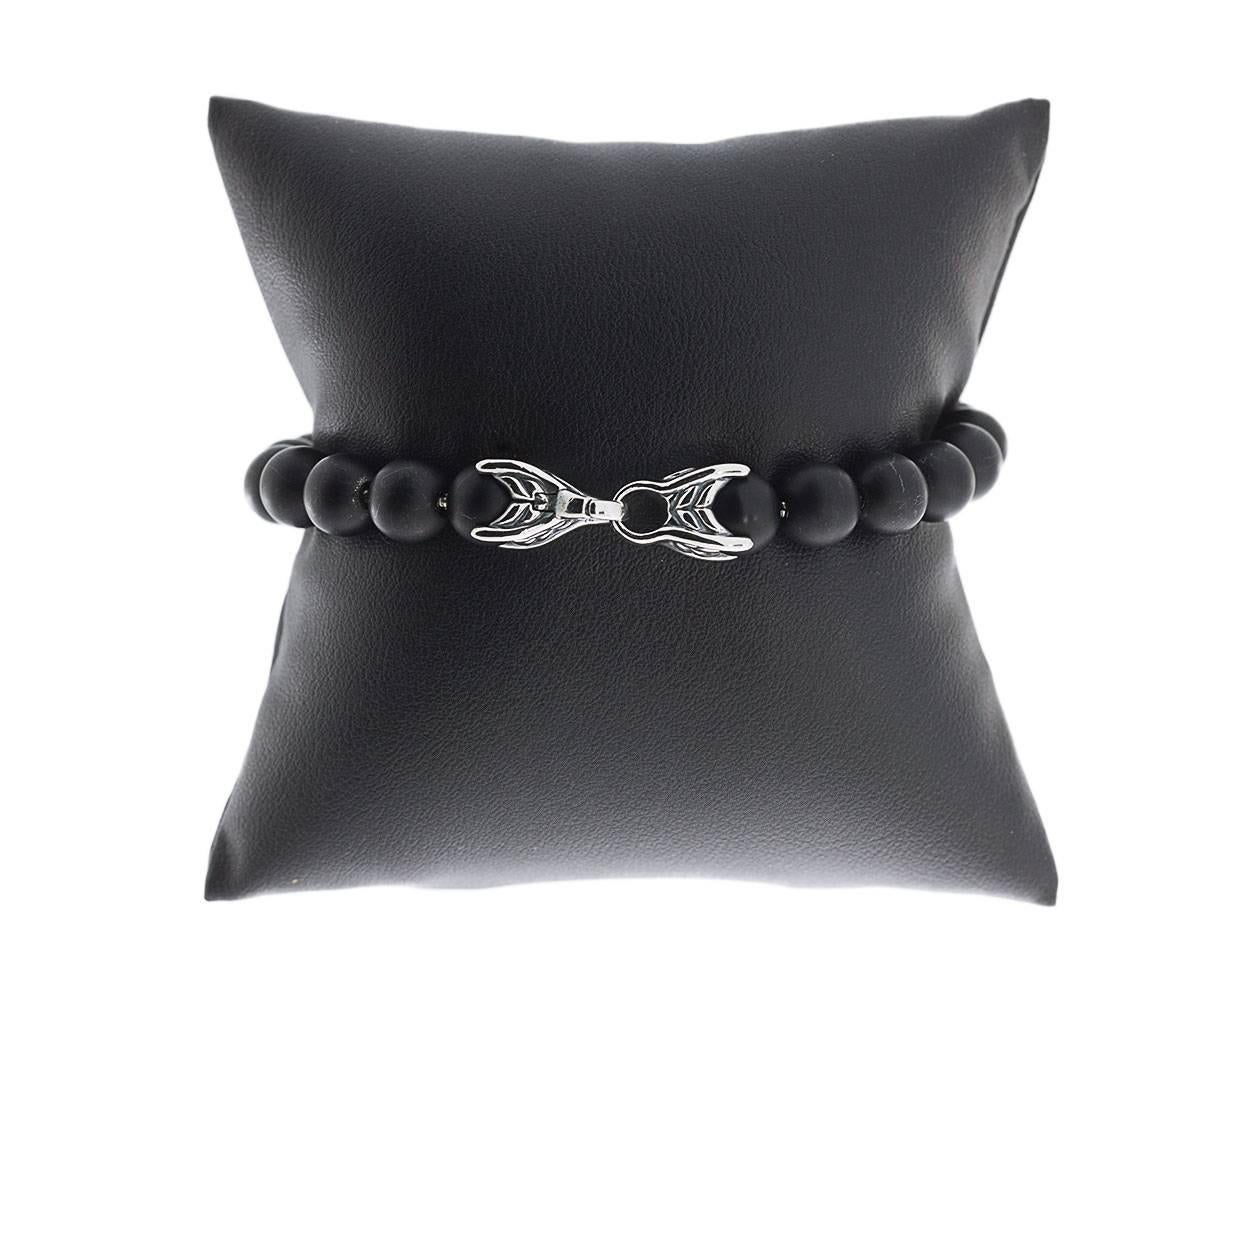 This beautiful David Yurman bracelet is from the Spiritual Bead collection. The bracelet features spherical onyx beads with a sterling silver clasp. This bracelet would make a wonderful addition to any woman's jewelry collection! MSRP